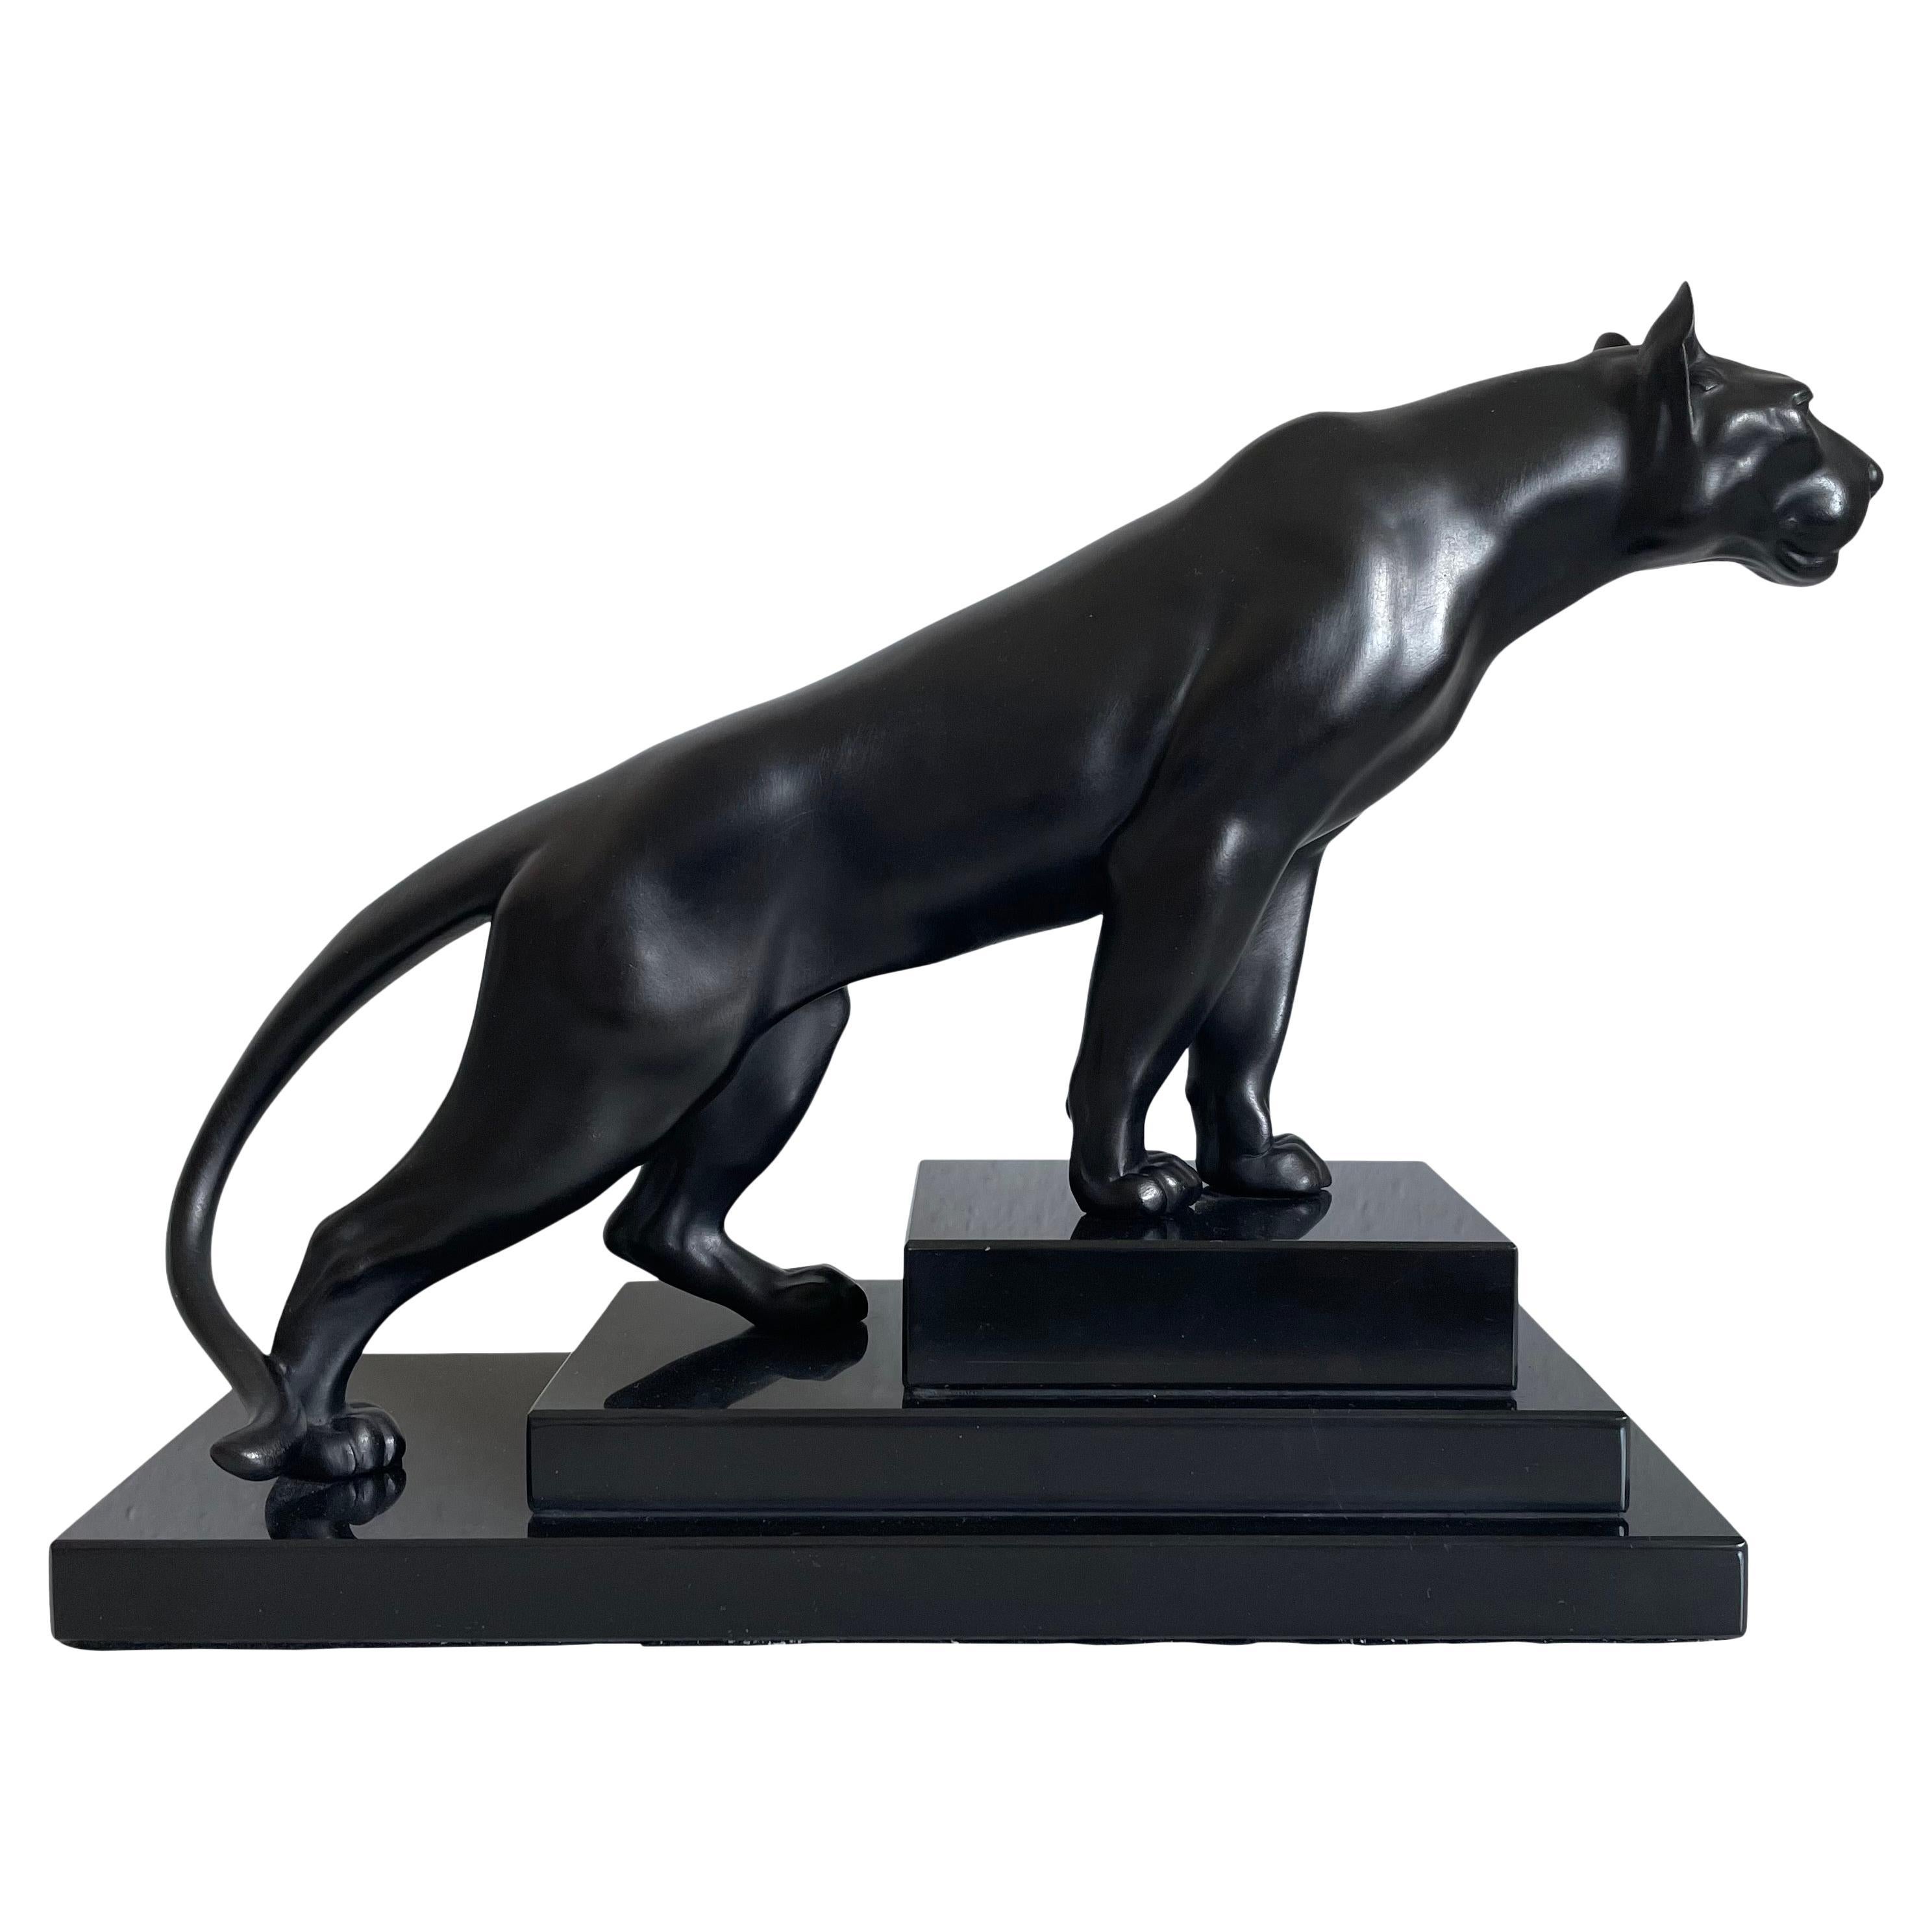 Art Deco Style Black Panther Sculpture by Max Le Verrier on Stepped Marble Base